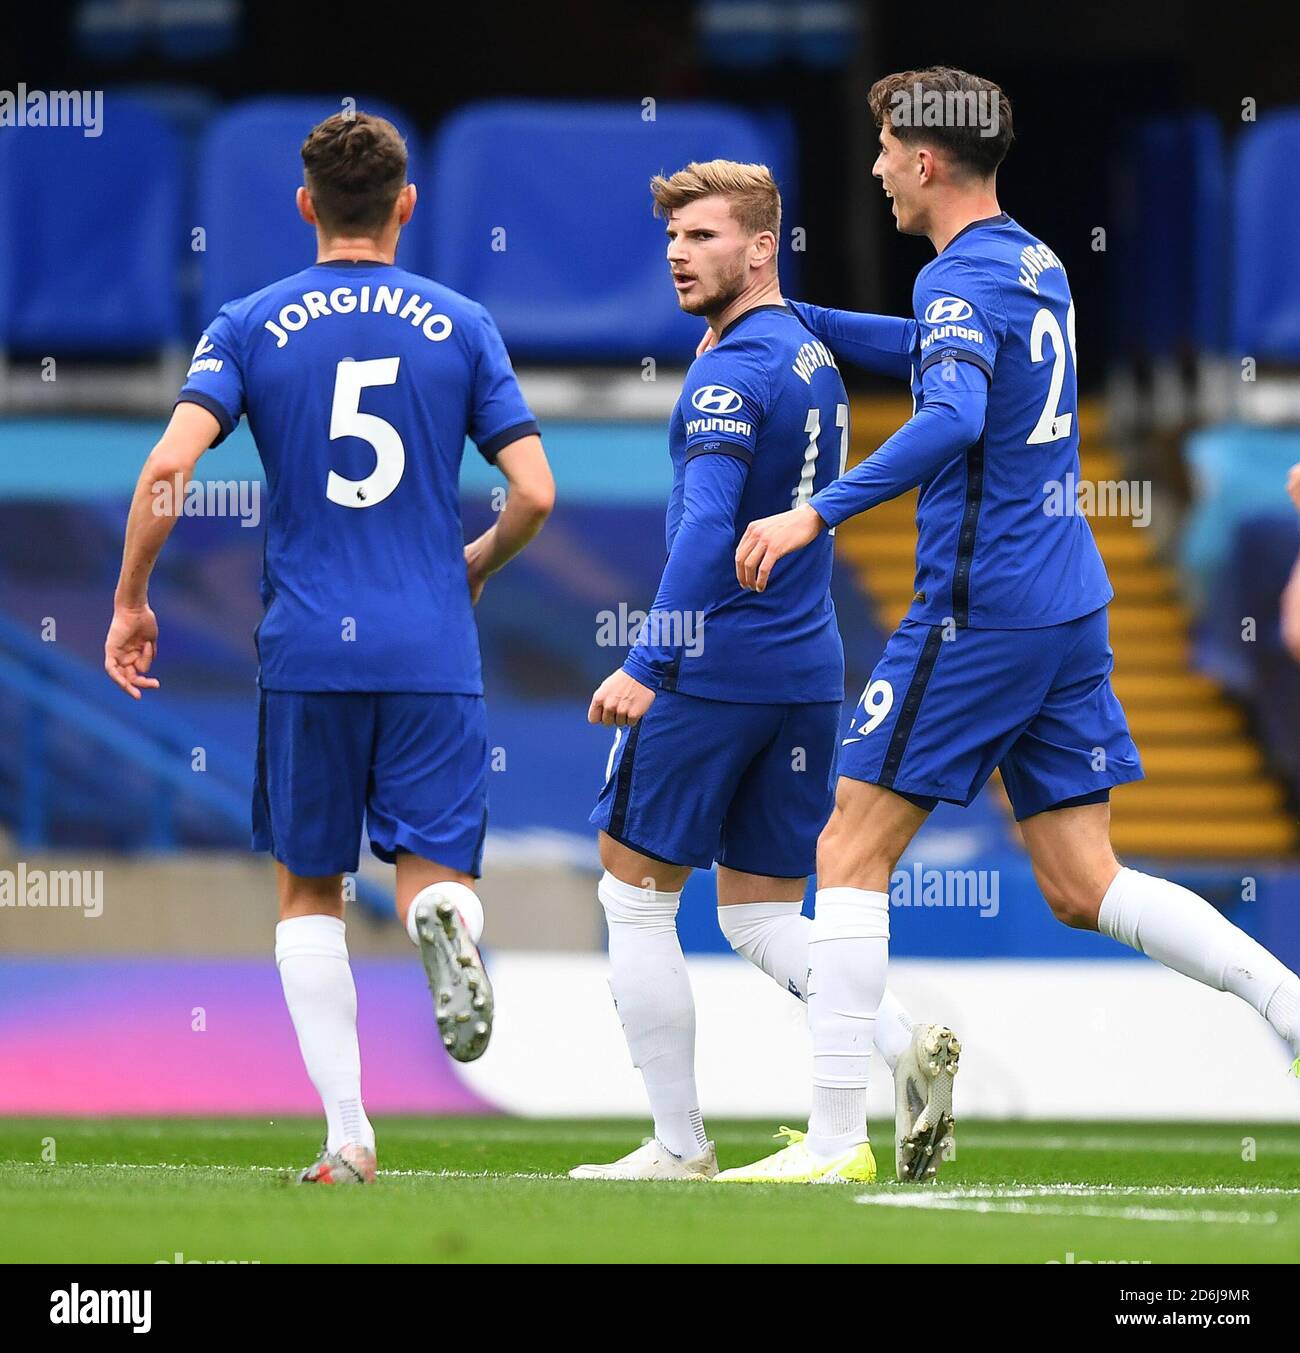 London, England, 17th Oct 2020  Timo Werner celebrates his first goal during the Premier League match at Stamford Bridge, London.  Chelsea v Southampton.  Premier League. Credit : Mark Pain / Alamy Live News Stock Photo